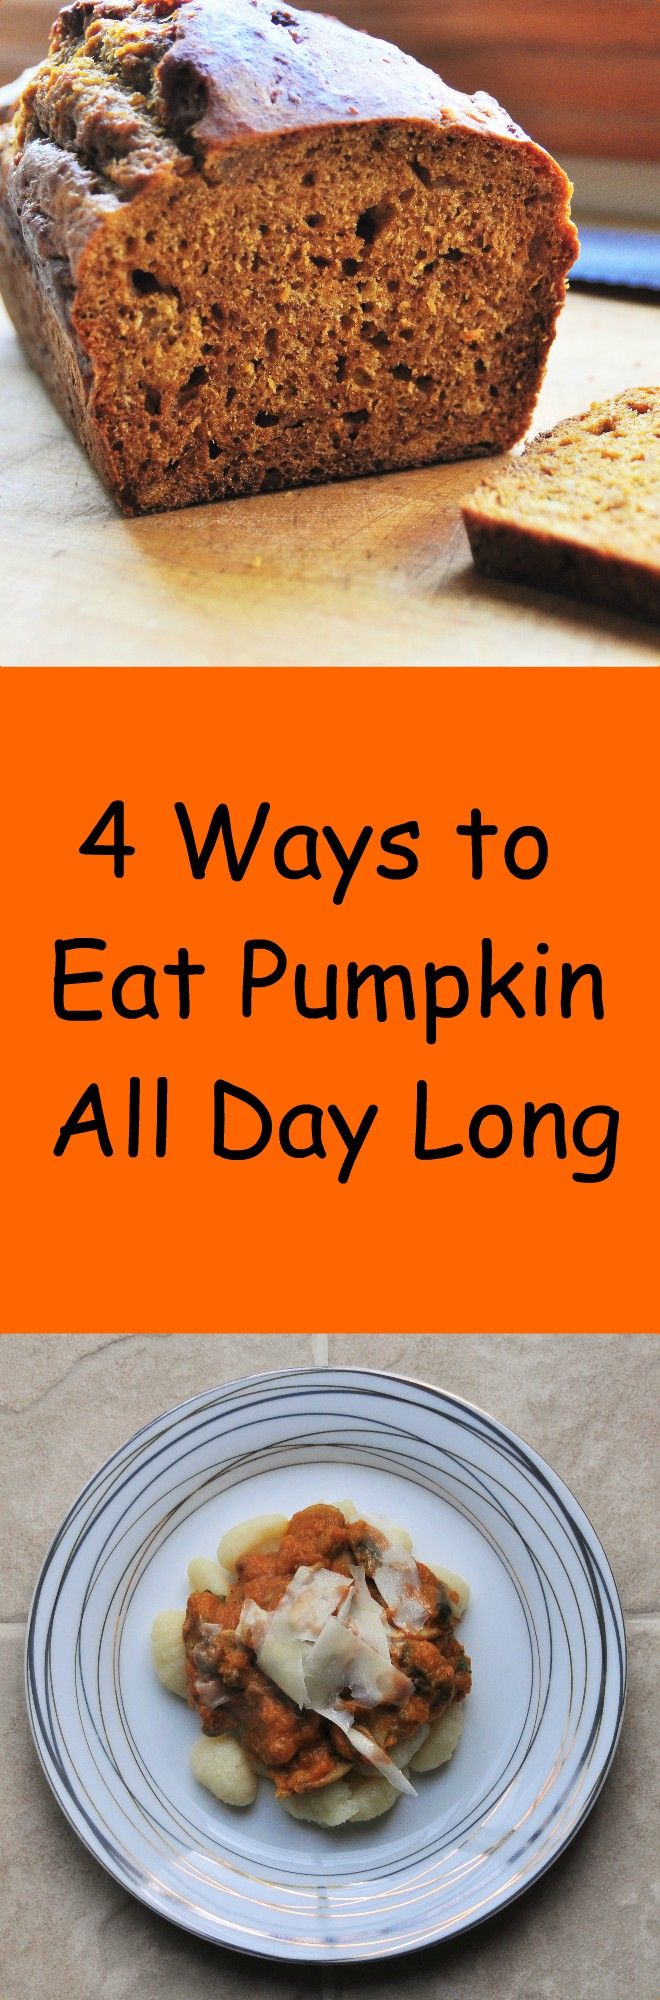 4 Ways to Eat Pumpkin All Day Long